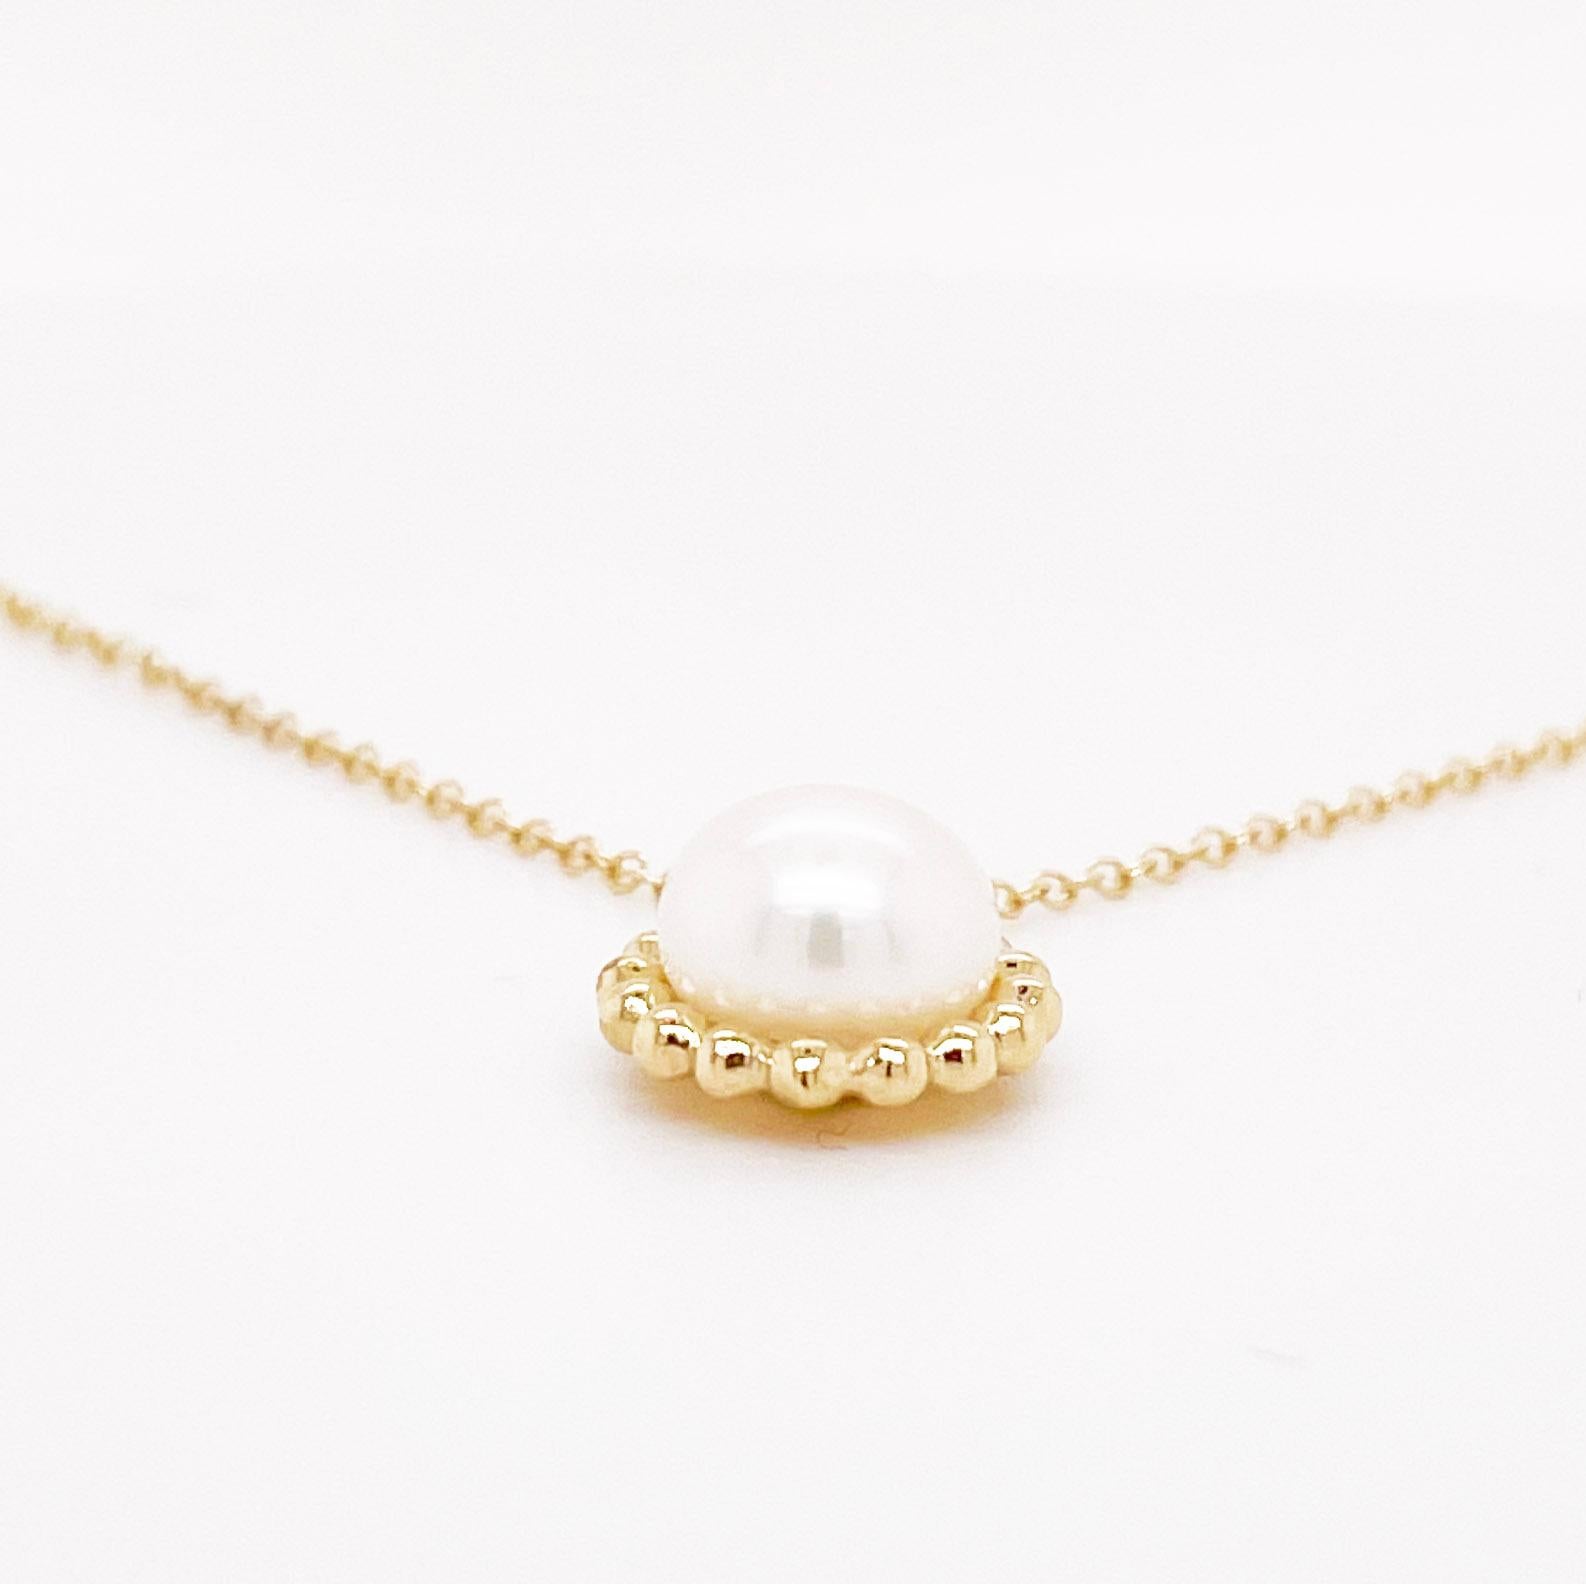 This lovely pearl necklace has a gold beaded frame around it.  It also matches a ring and earring set that we have listed on 1stDibs.  The necklace is stunning with one genuine cultured pearl in the center.  The chain has three setting so that you